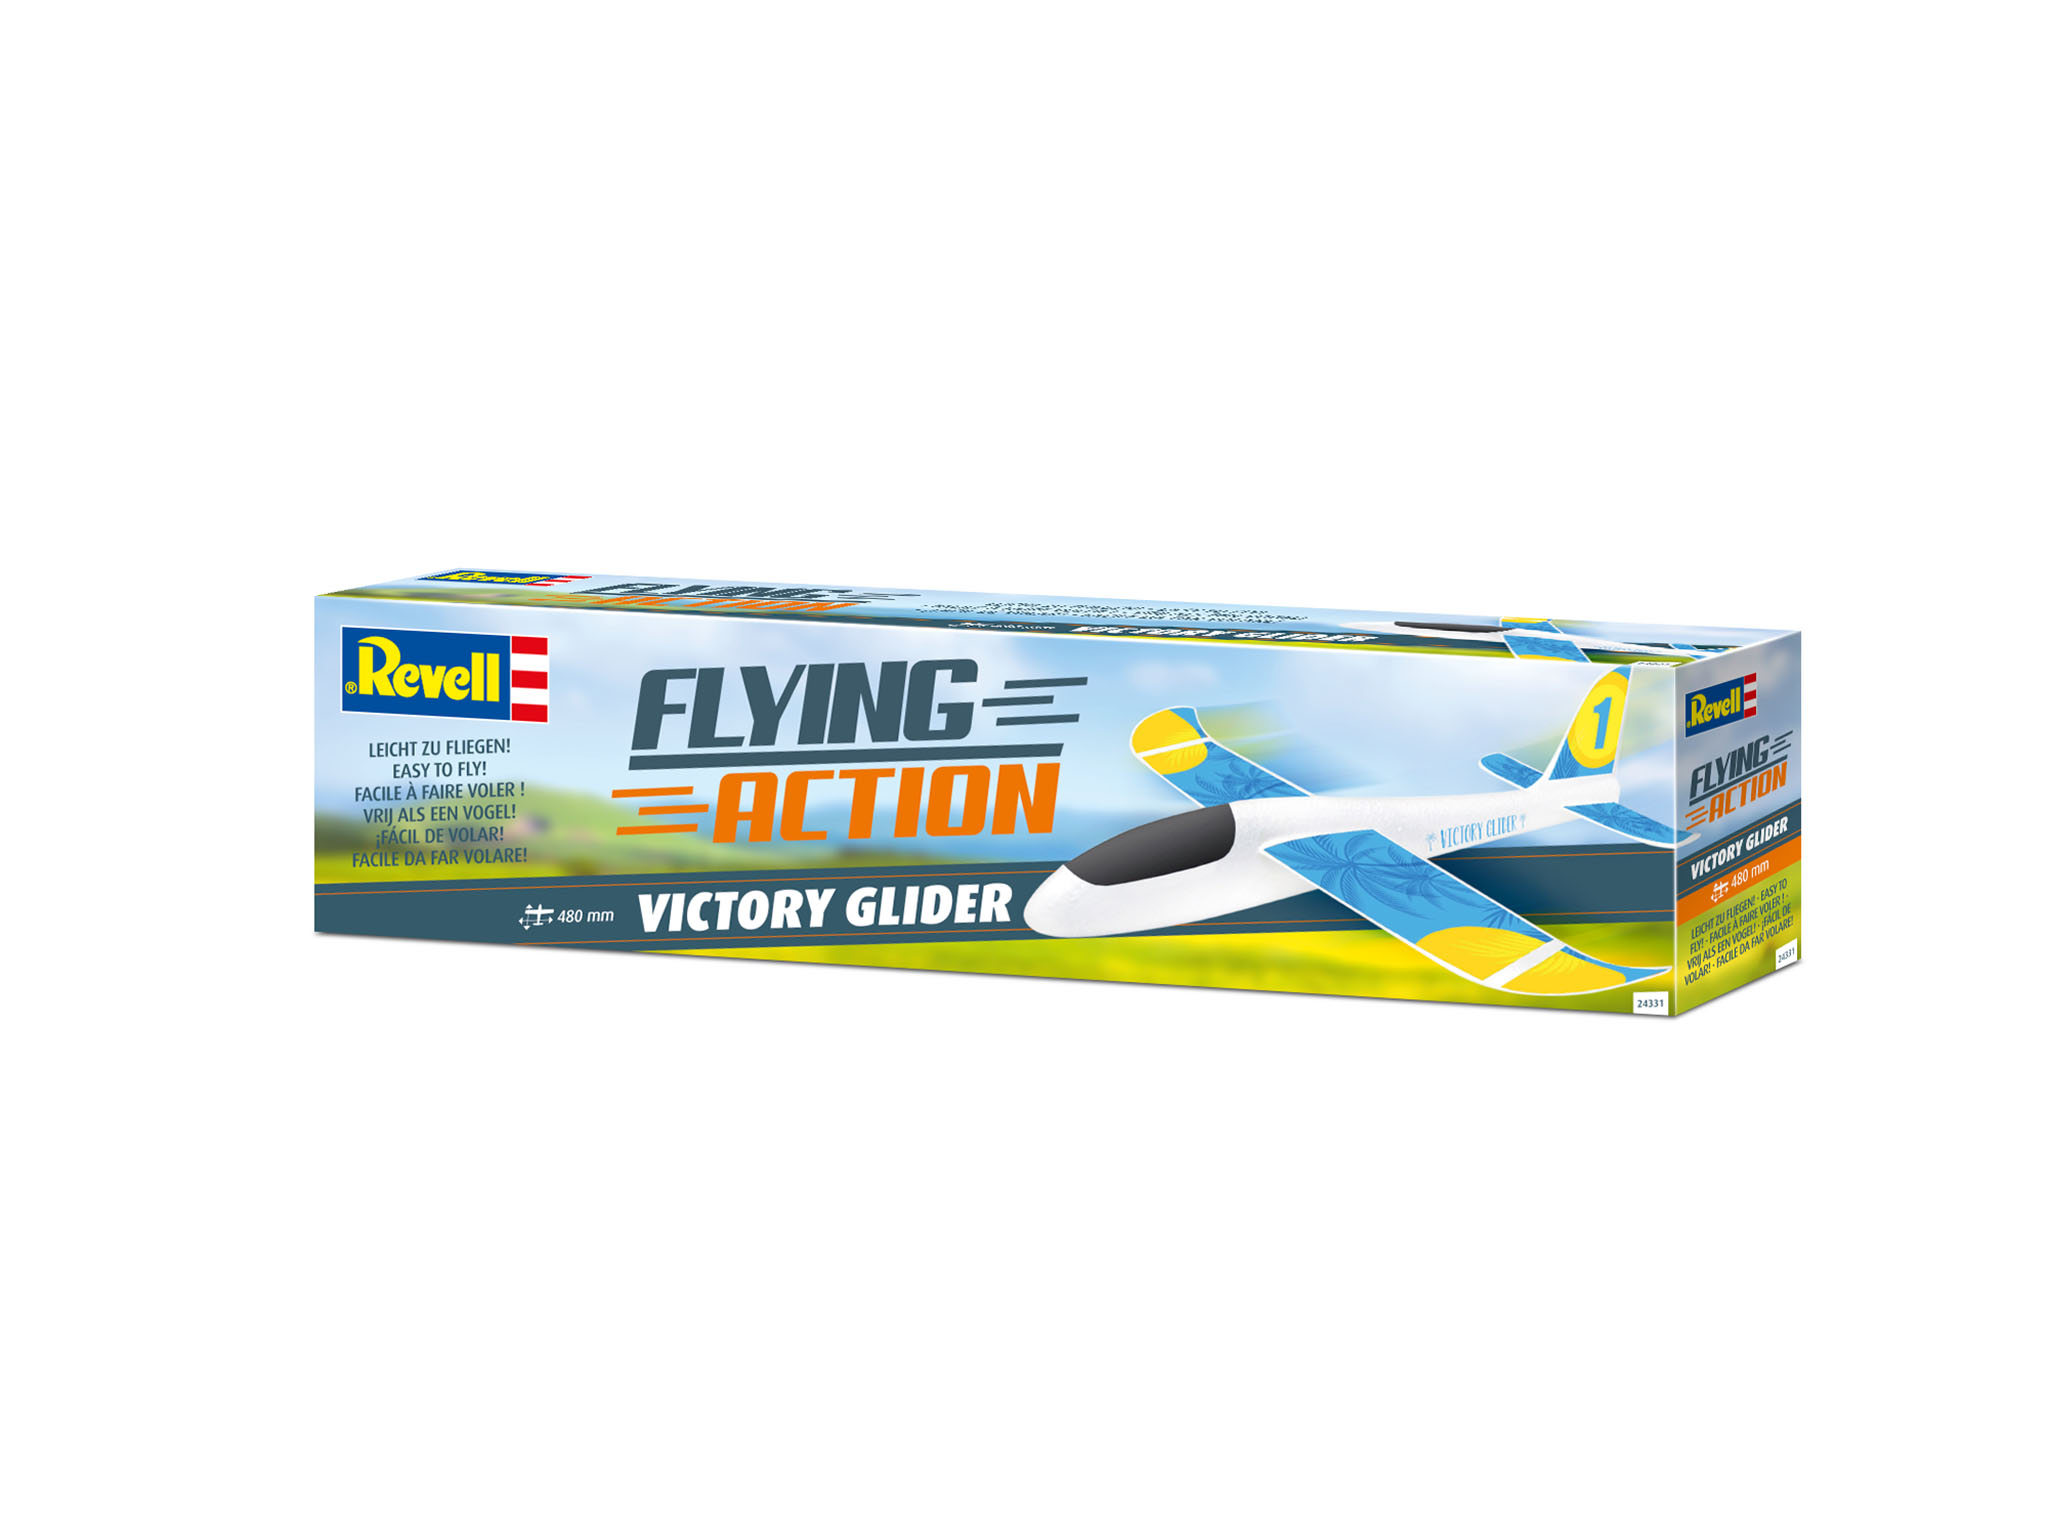 Flying Action - Victory Glide - Flying Action - Victory Glider